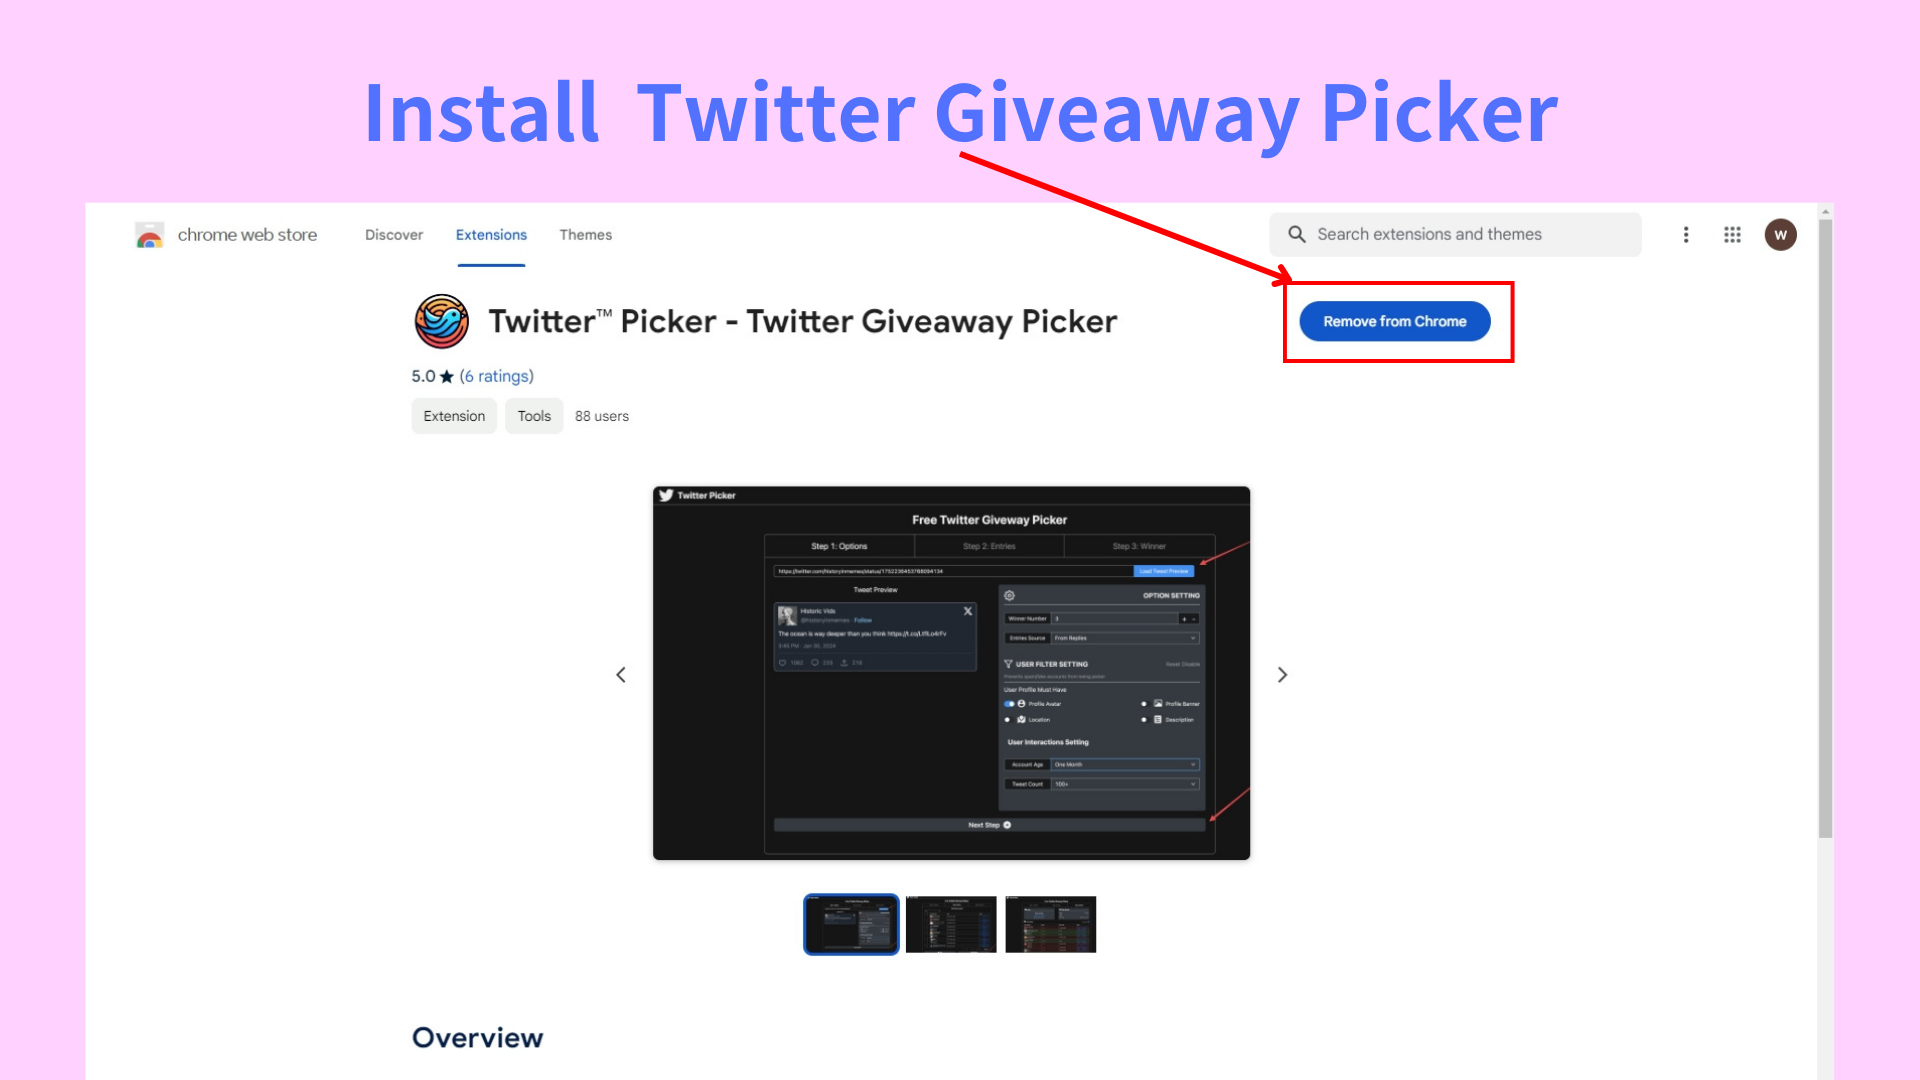 Install and Open the Twitter Giveaway Picker Extension 